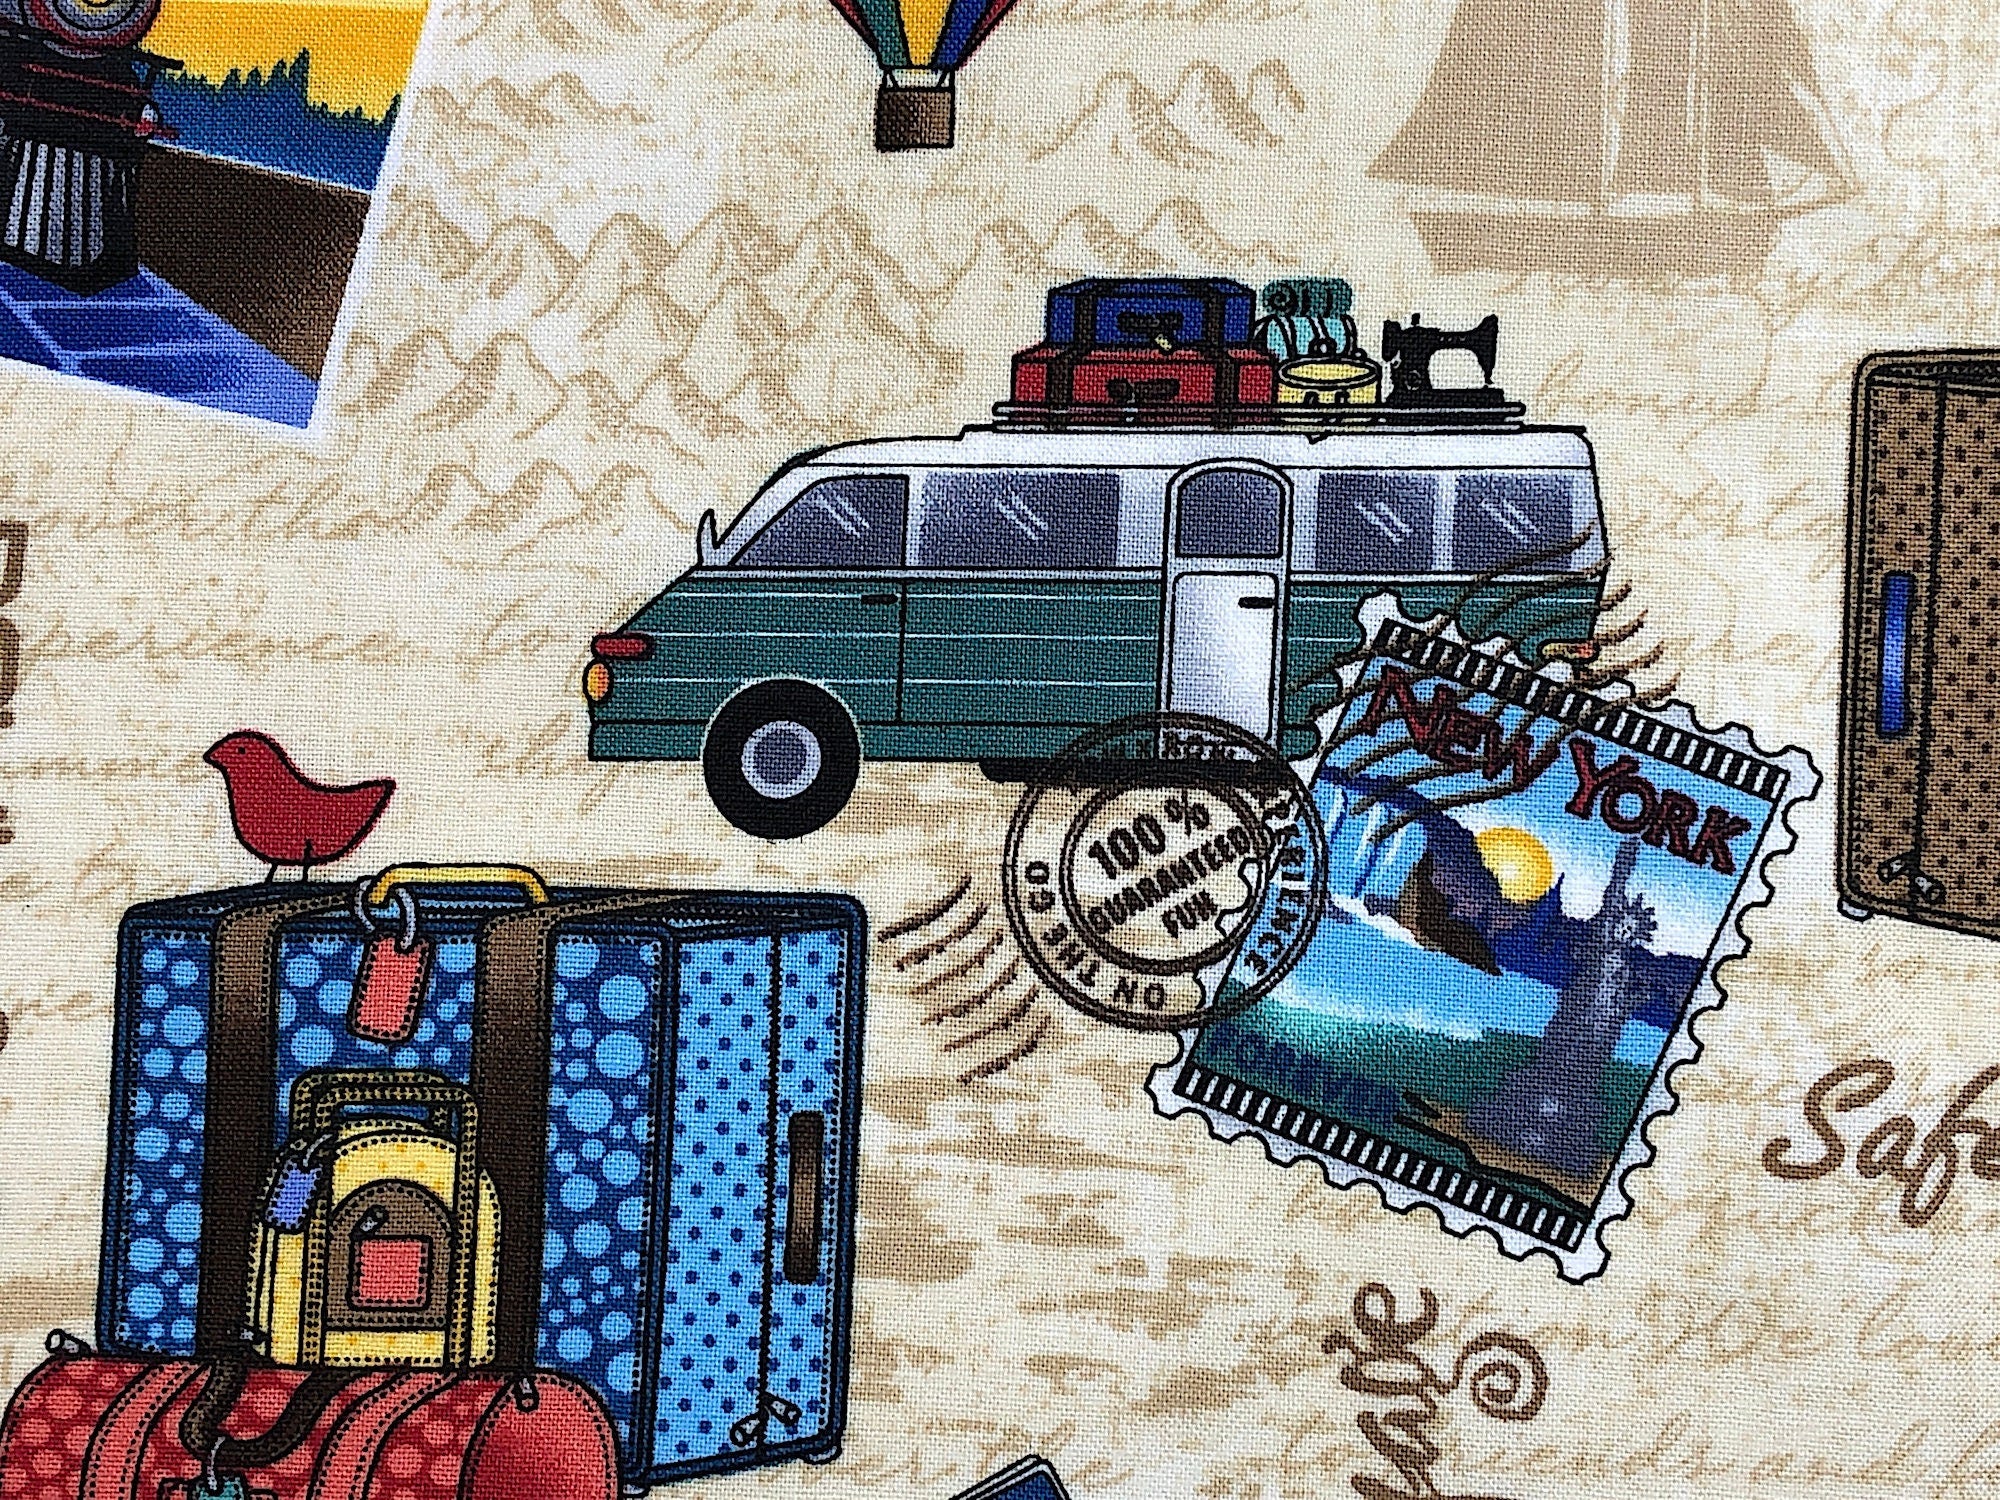 Close up of a van with luggage and a sewing machine on top.